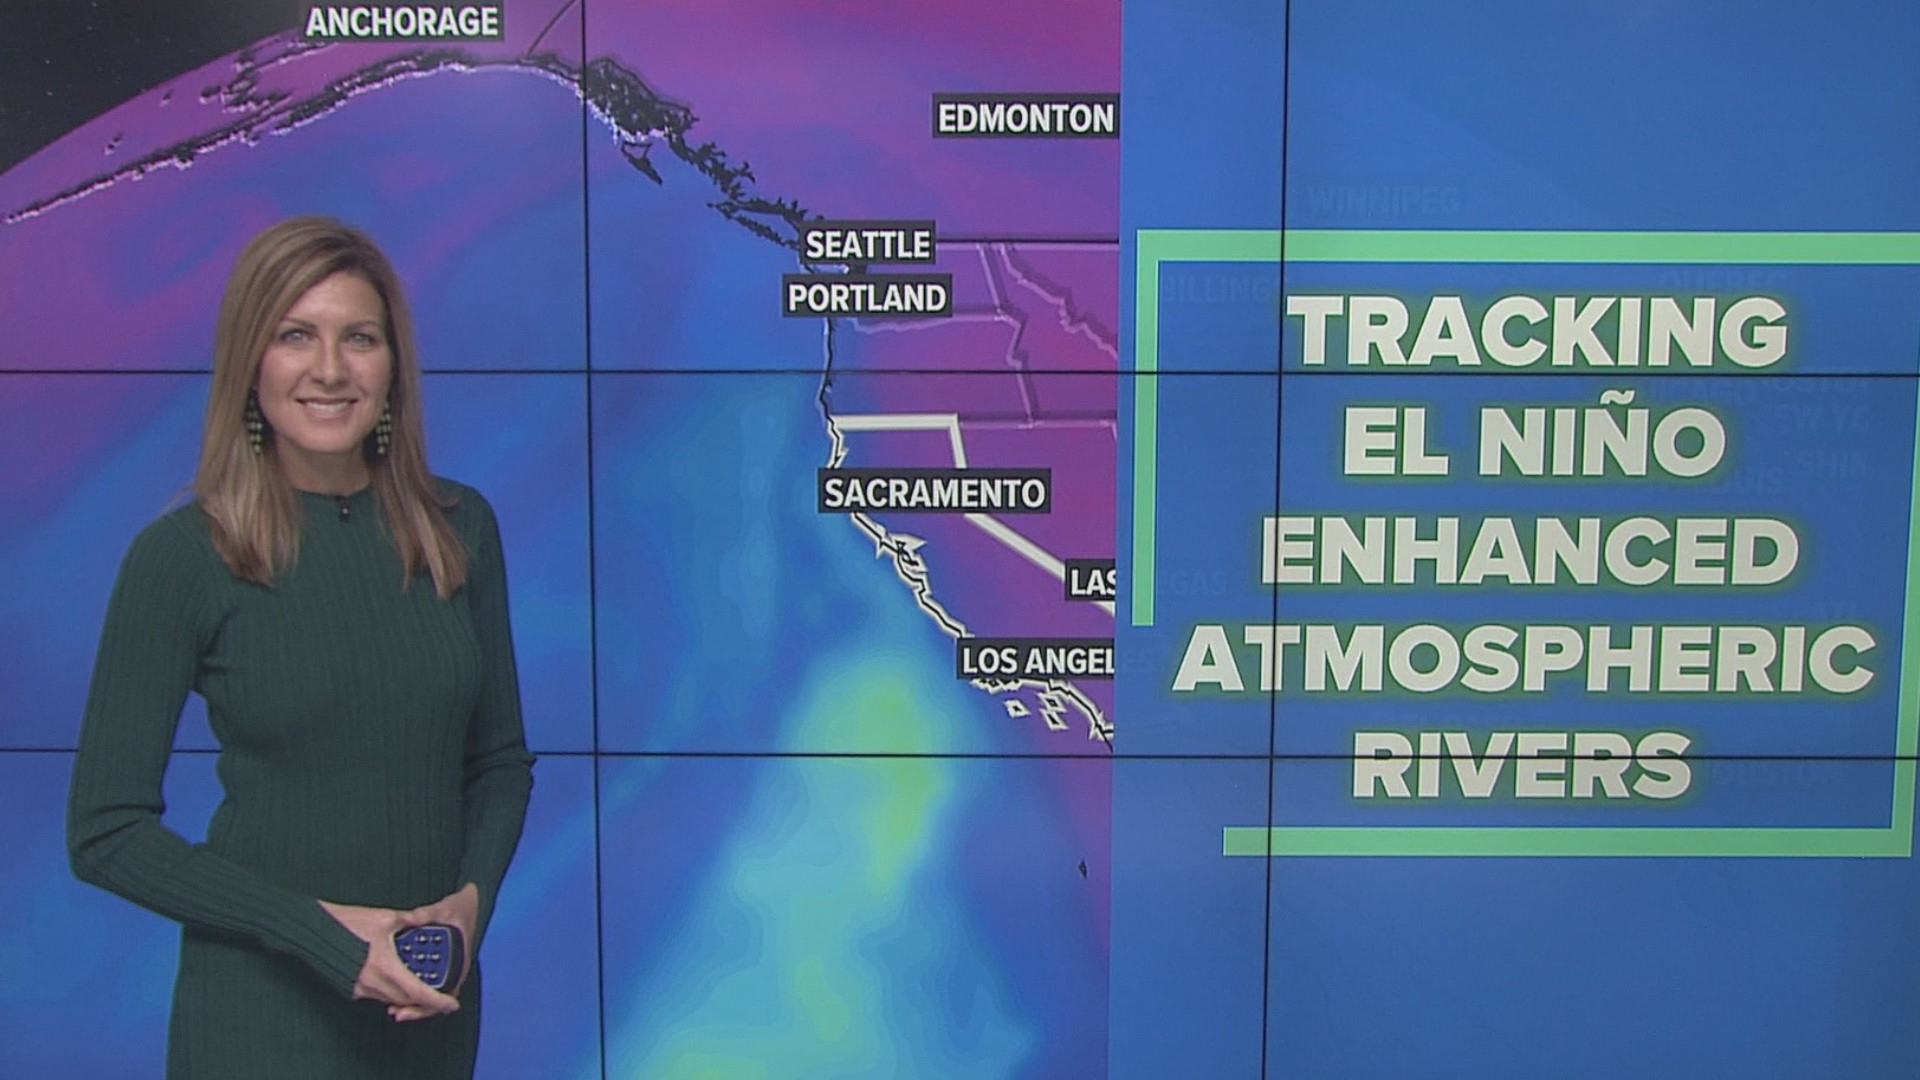 The storm track is shifting to favor a wetter outlook for California leading into a bigger holiday travel week. This as El Niño gains strength in the Pacific.